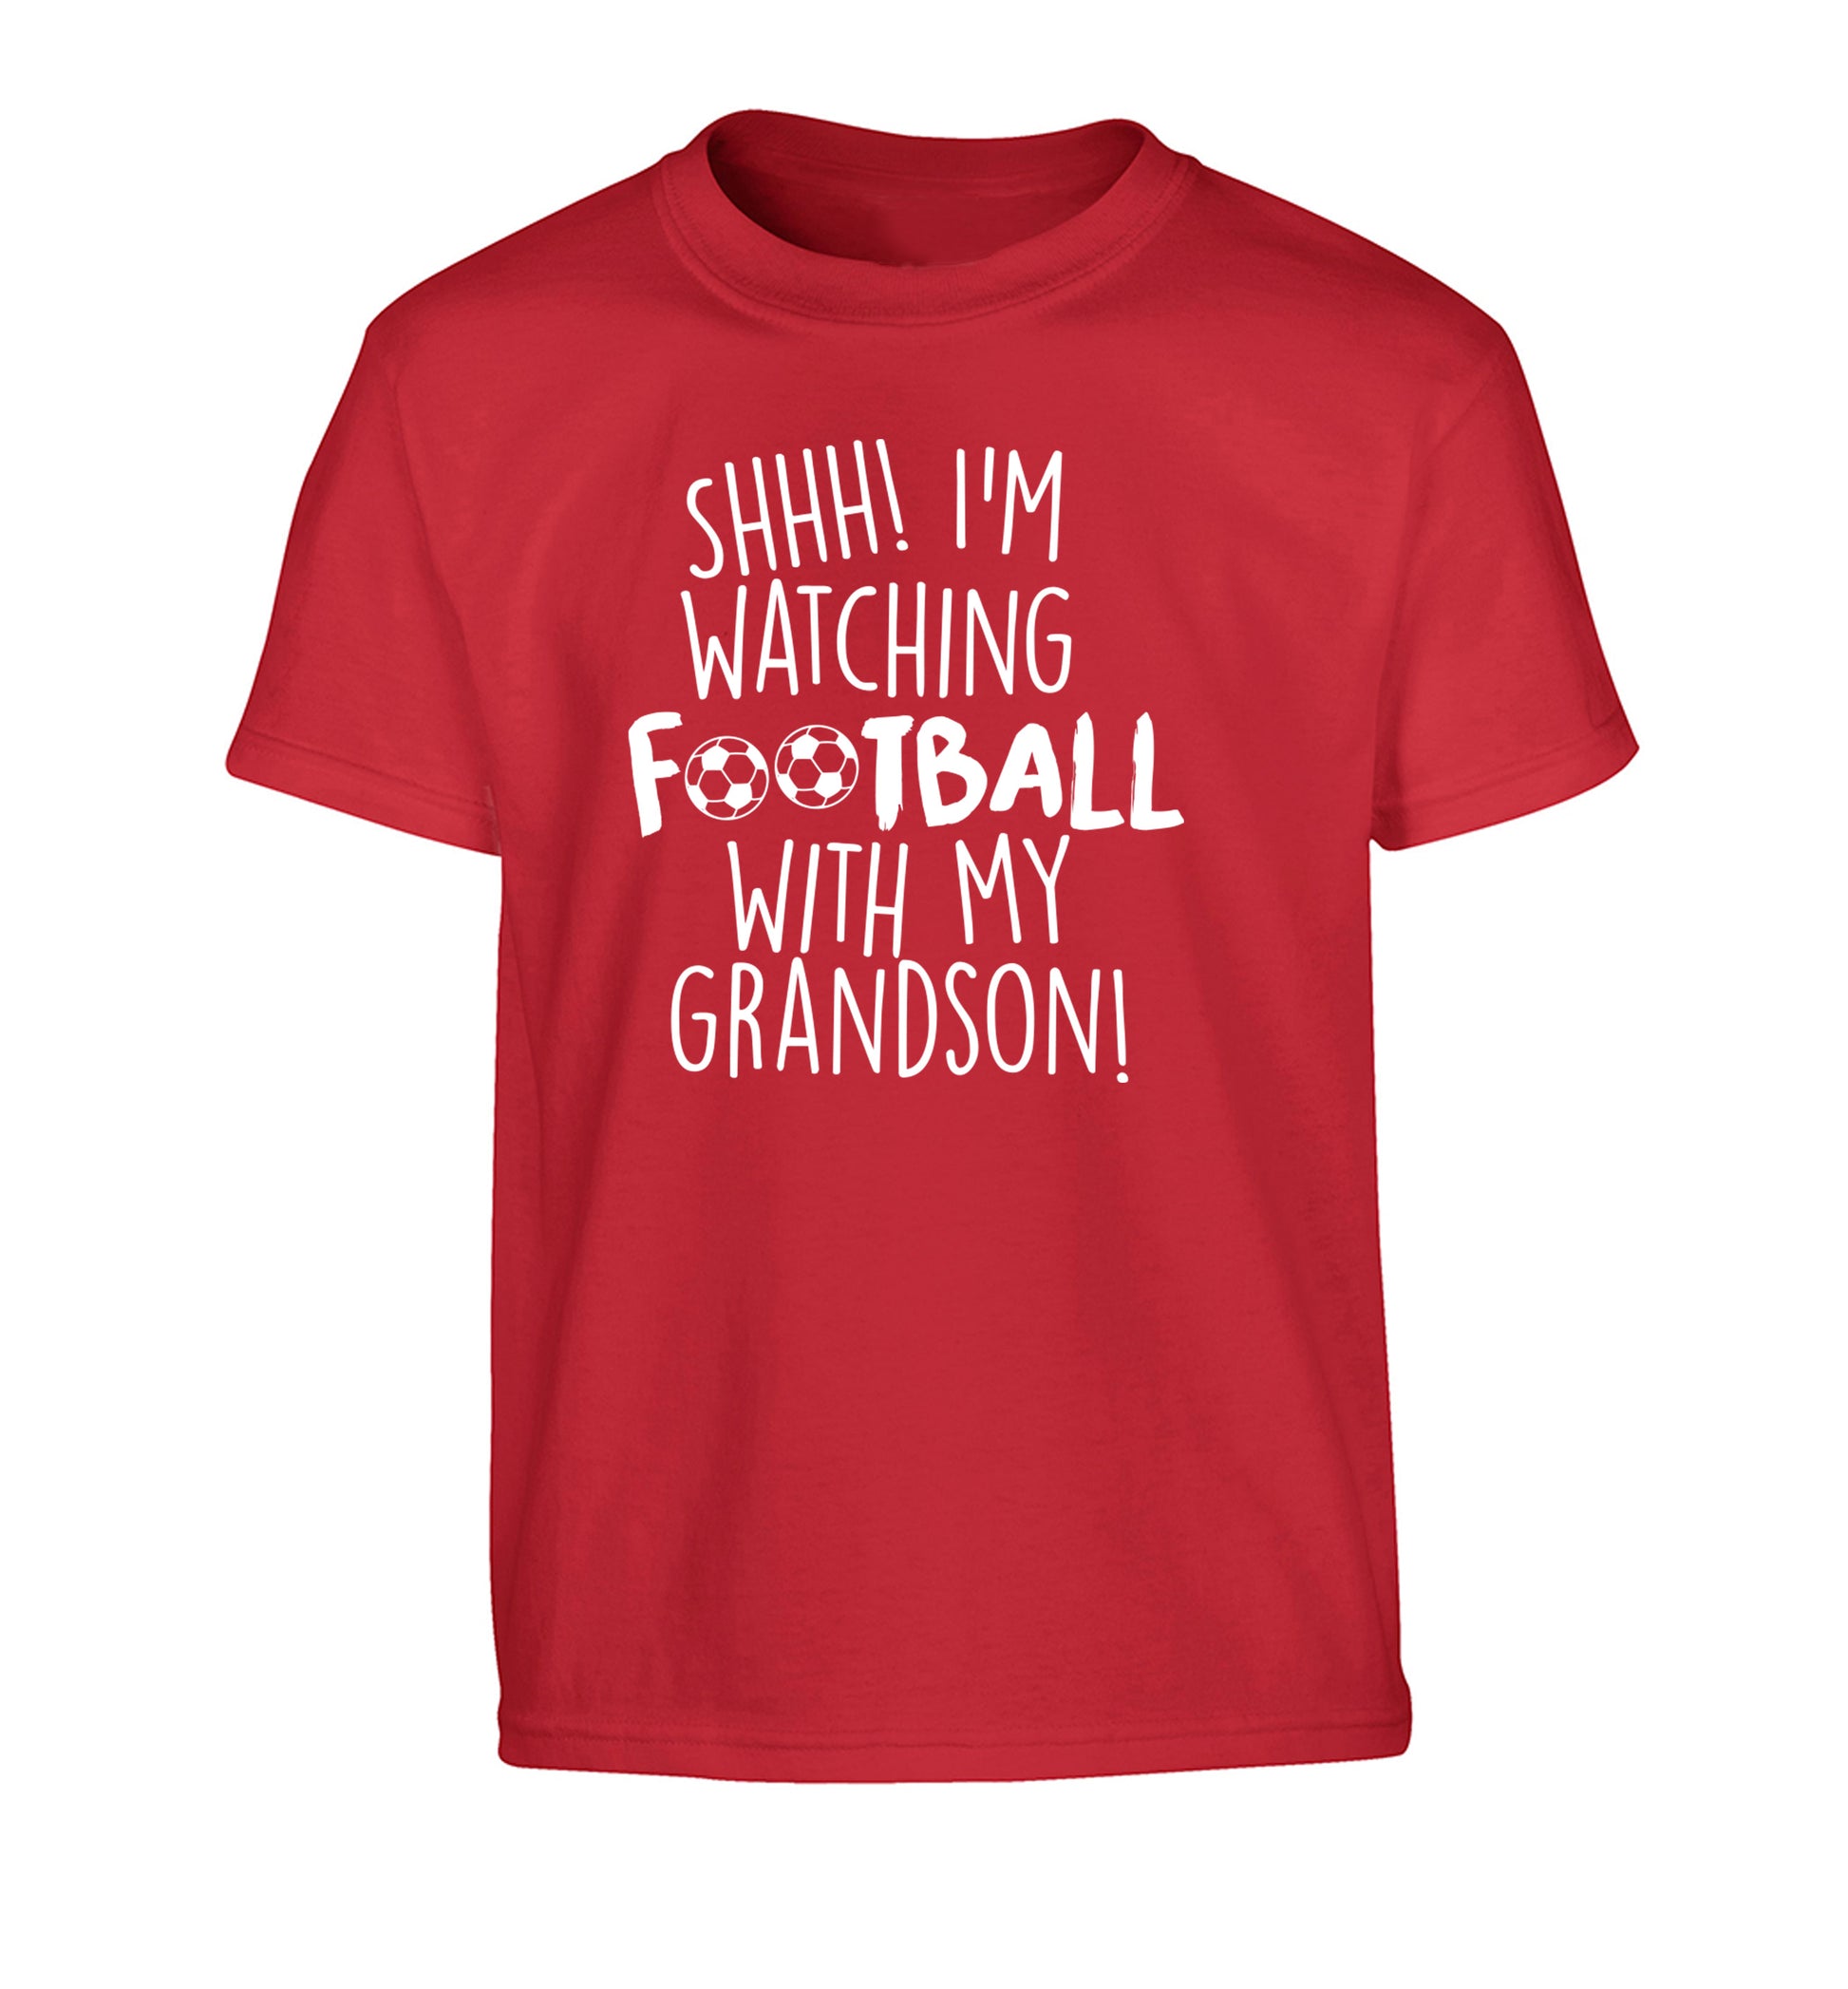 Shhh I'm watching football with my grandson Children's red Tshirt 12-14 Years